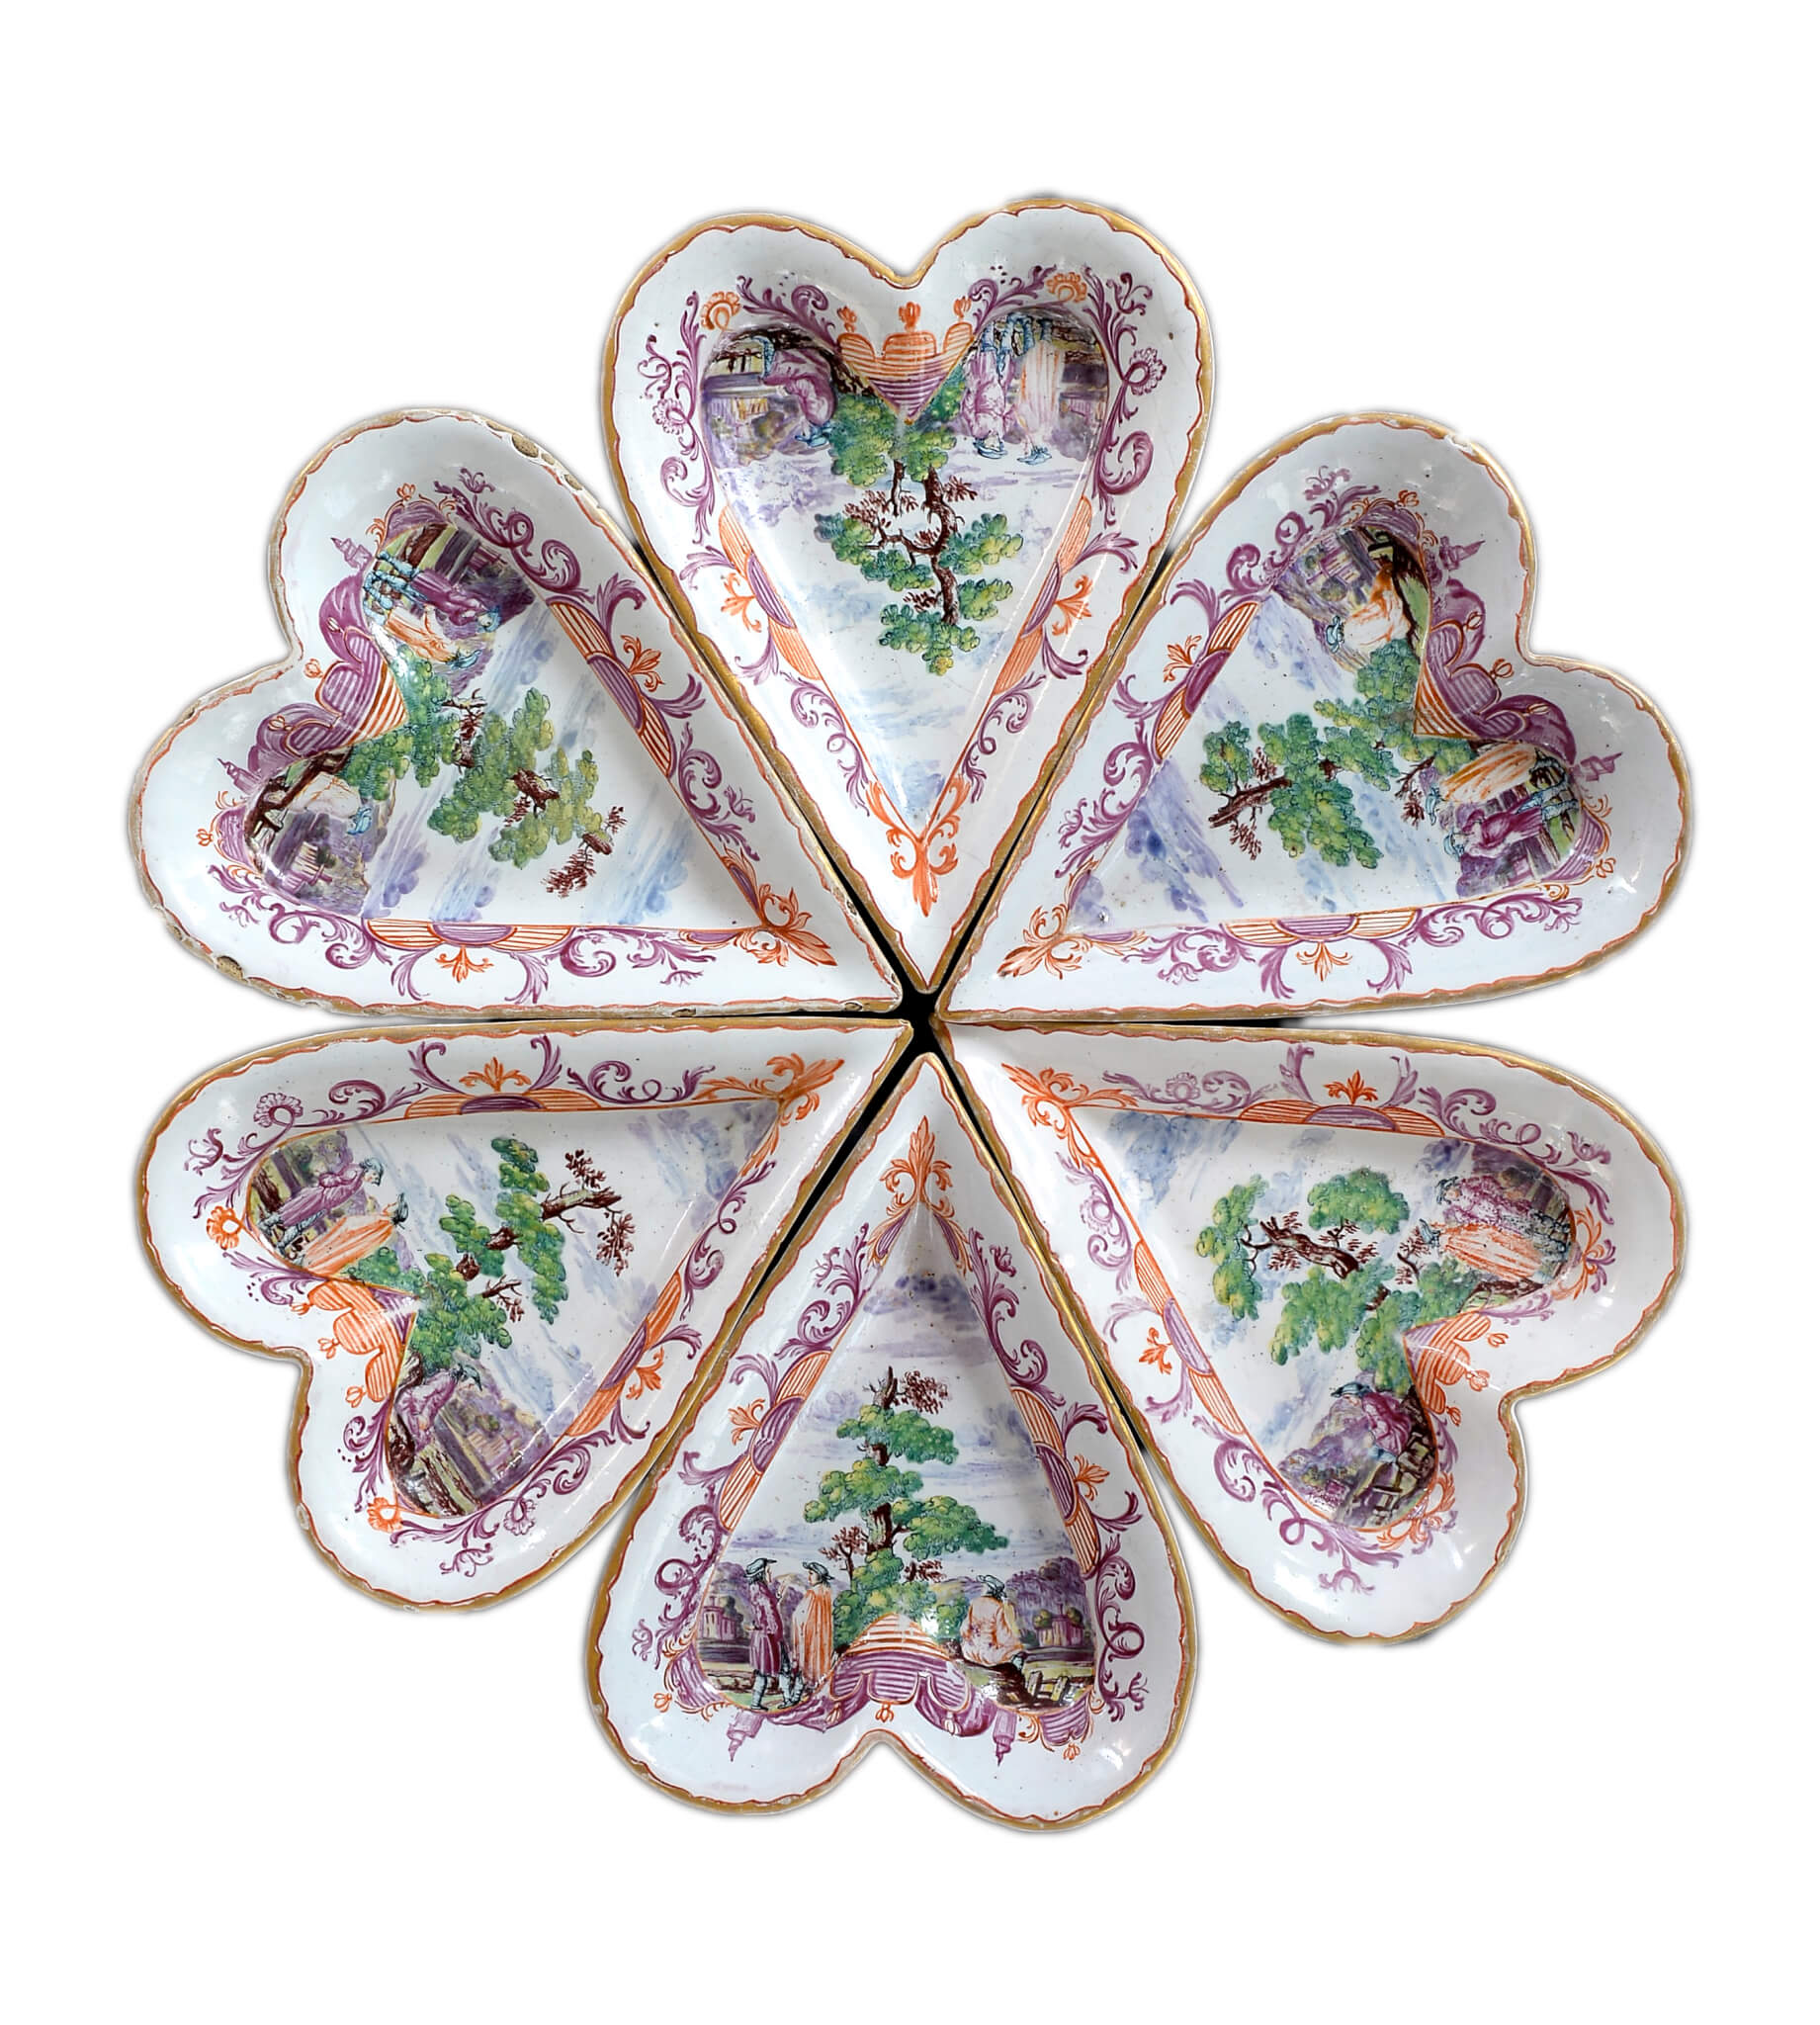 Set of Six Polychrome and Gilded Petit Feu Heart-Shaped Sweetmeat Dishes